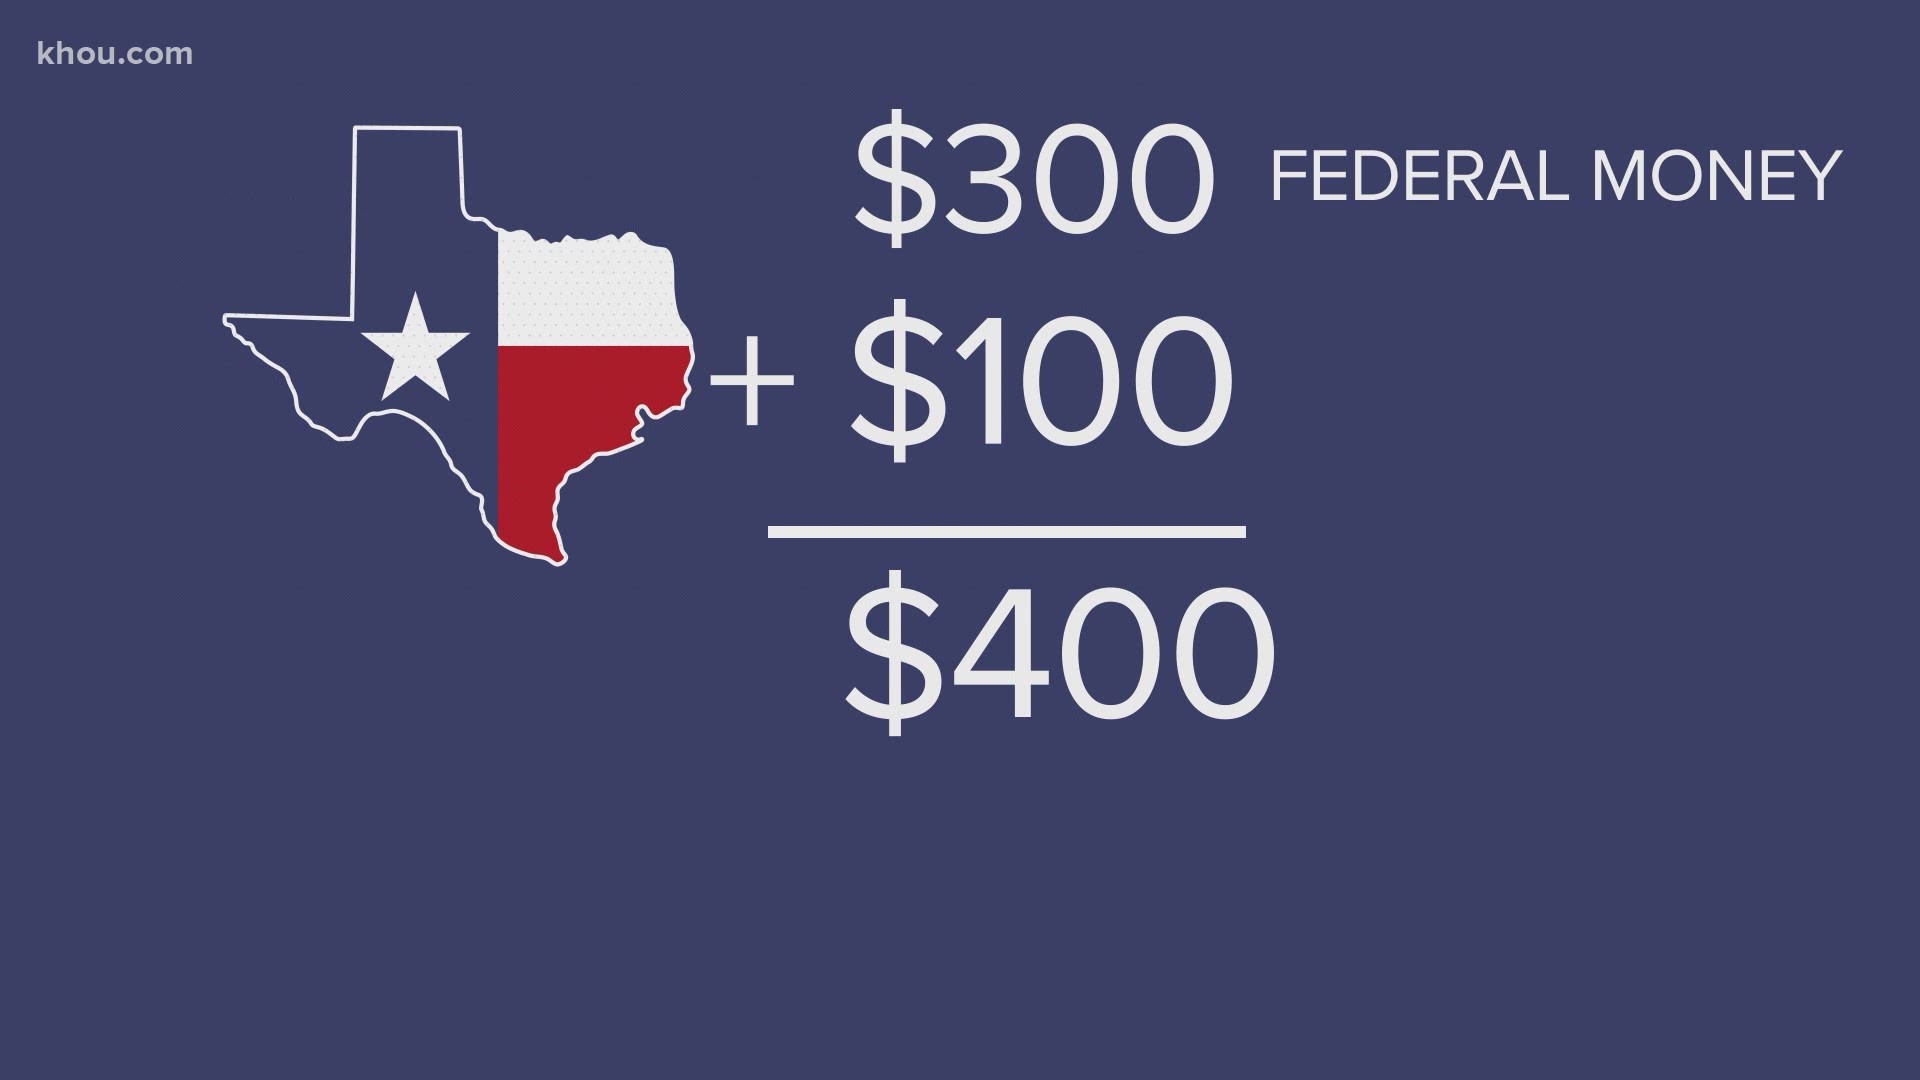 Texans shouldn’t count on the extra $400 in unemployment benefits yet. There’s a lot of confusion about President Donald Trump’s executive order.